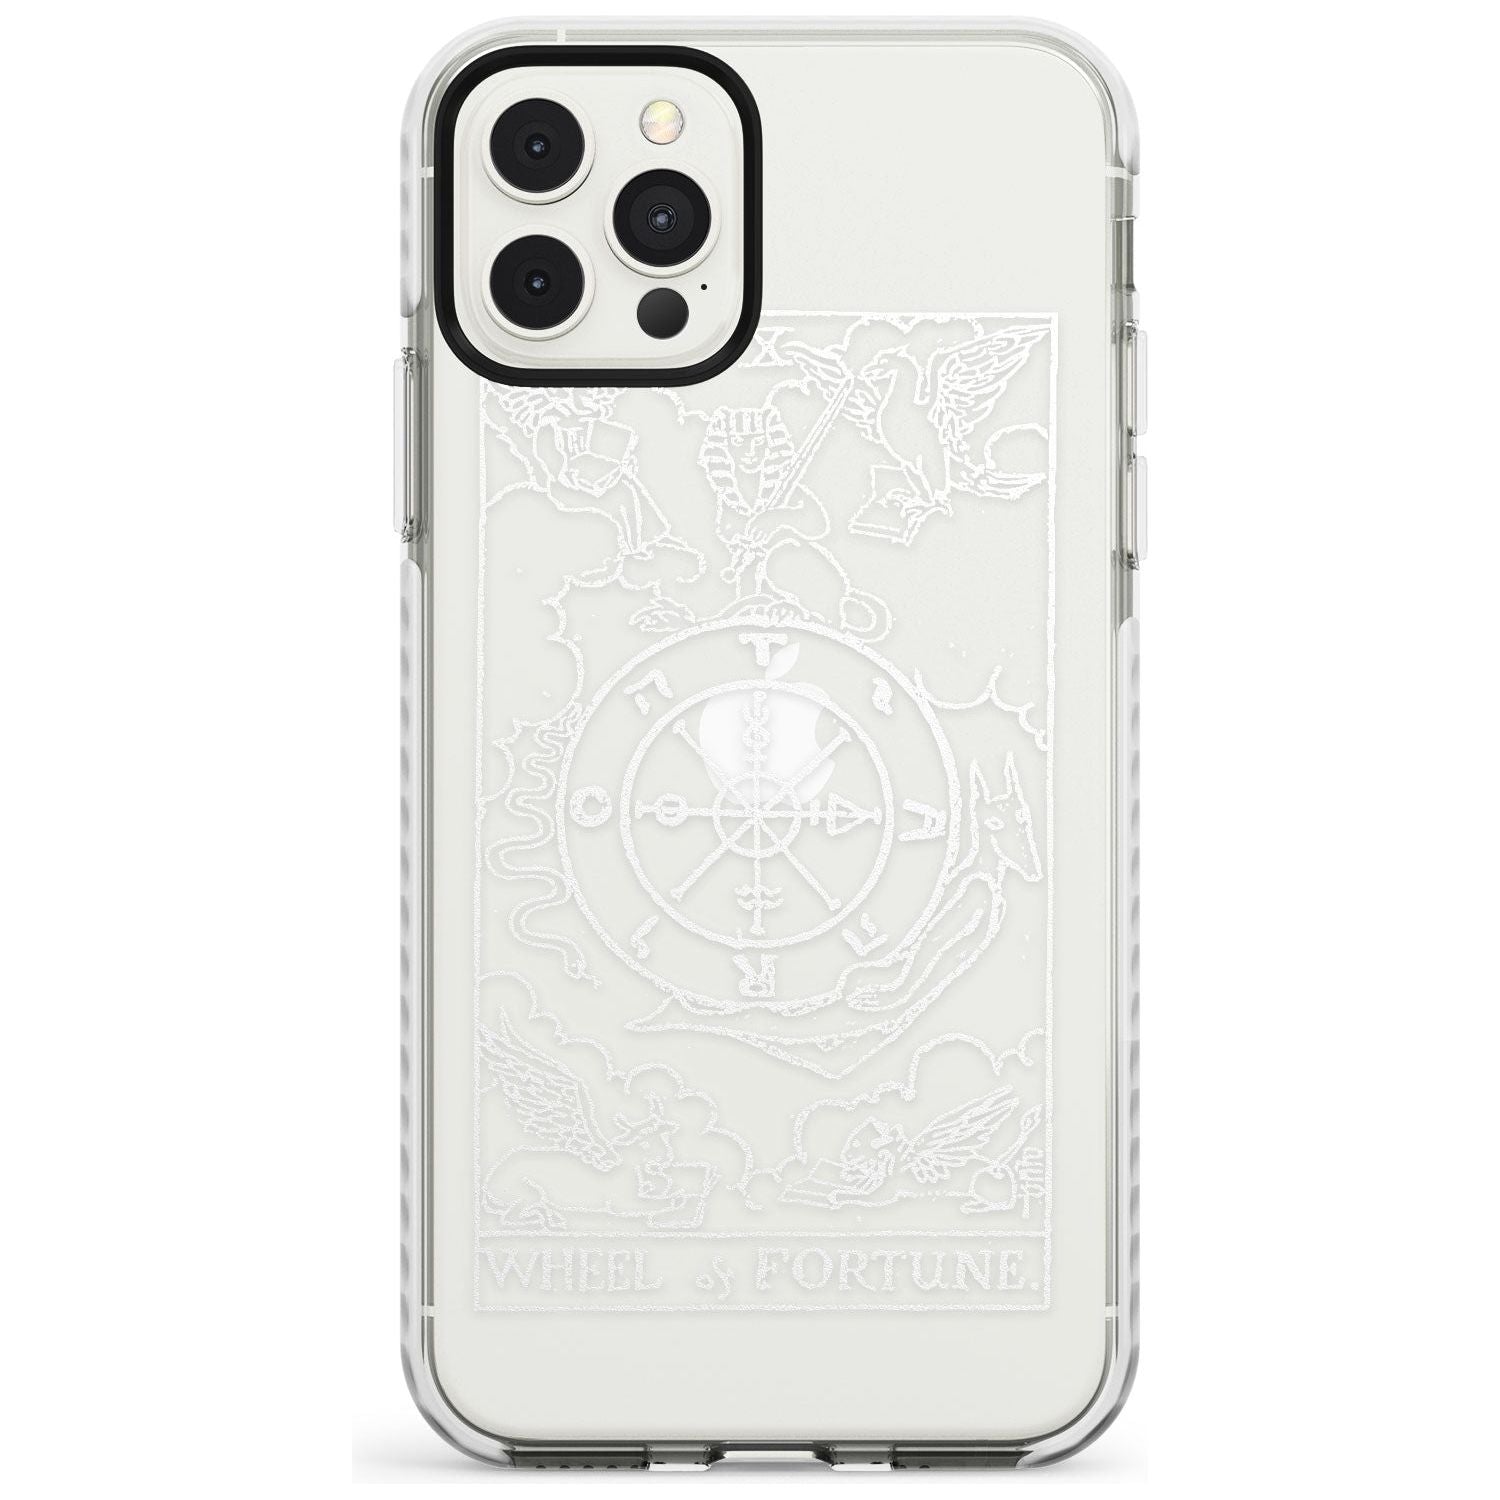 Wheel of Fortune Tarot Card - White Transparent Slim TPU Phone Case for iPhone 11 Pro Max